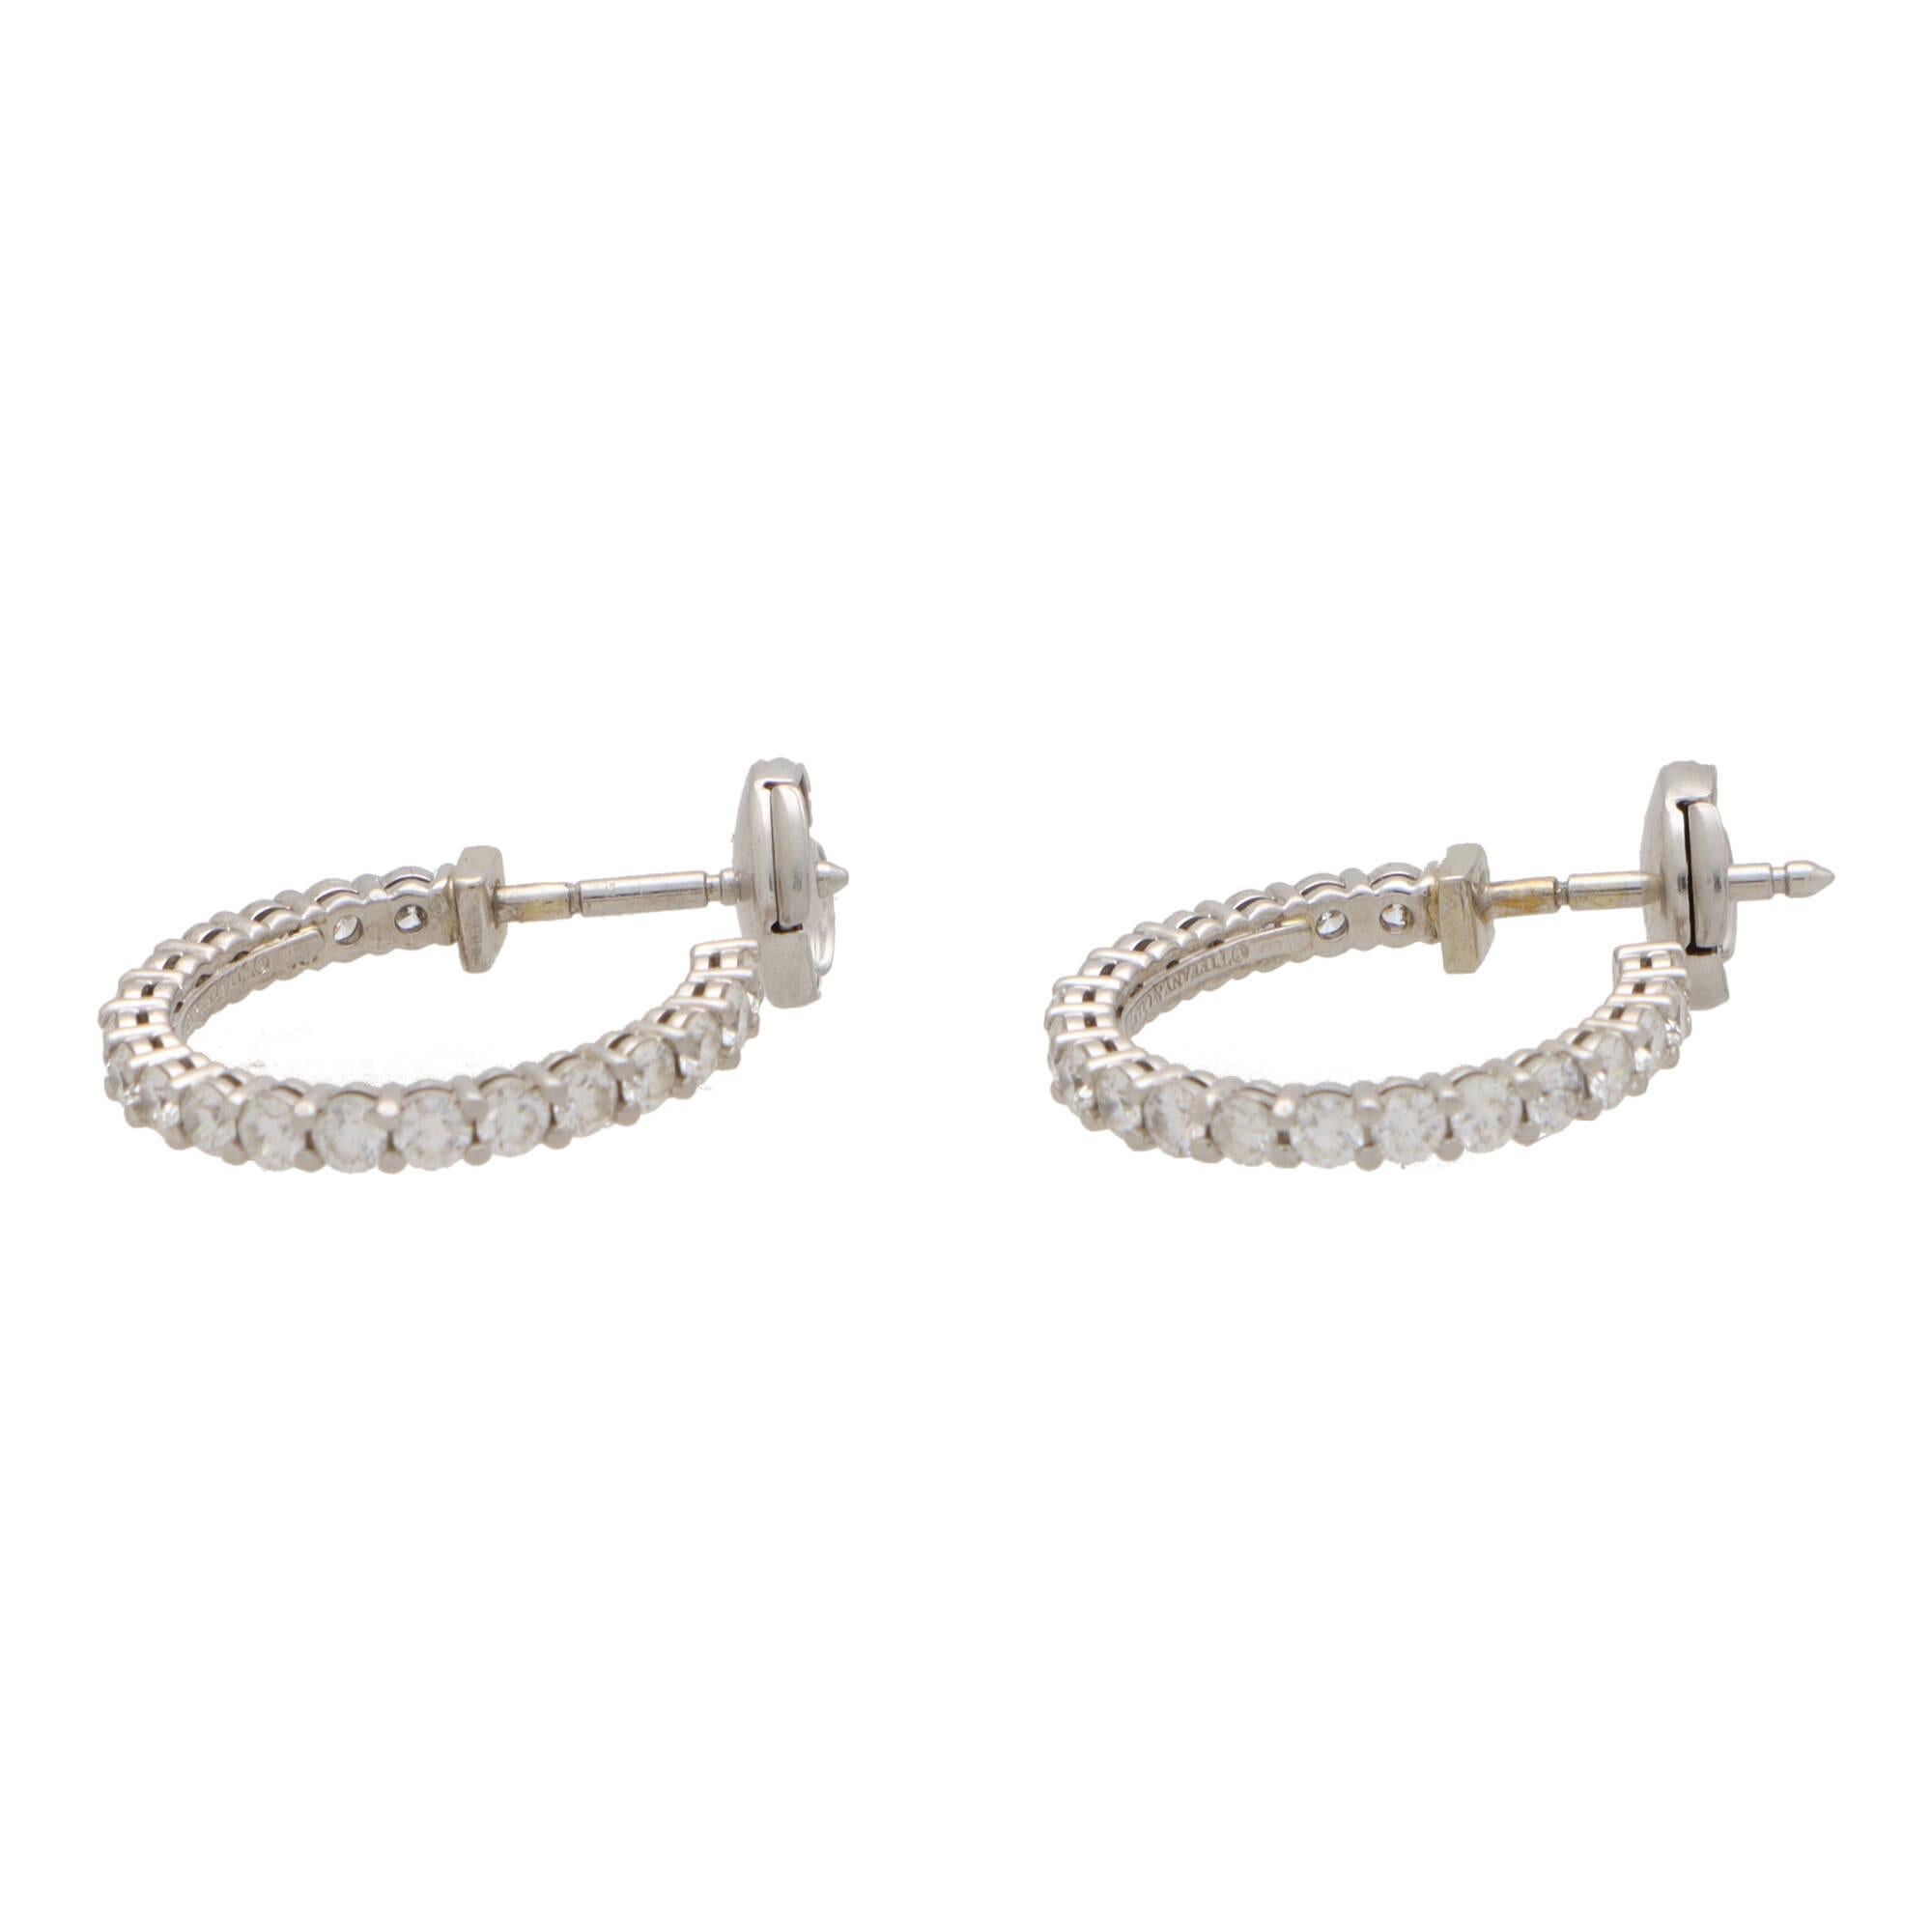 A beautiful pair of vintage Tiffany & Co. diamond hoop earrings set in platinum.

Each earring is composed of an elegant claw set hoop, set throughout with 20 round brilliant cut diamonds. They are secured to reverse with a post and alpha back